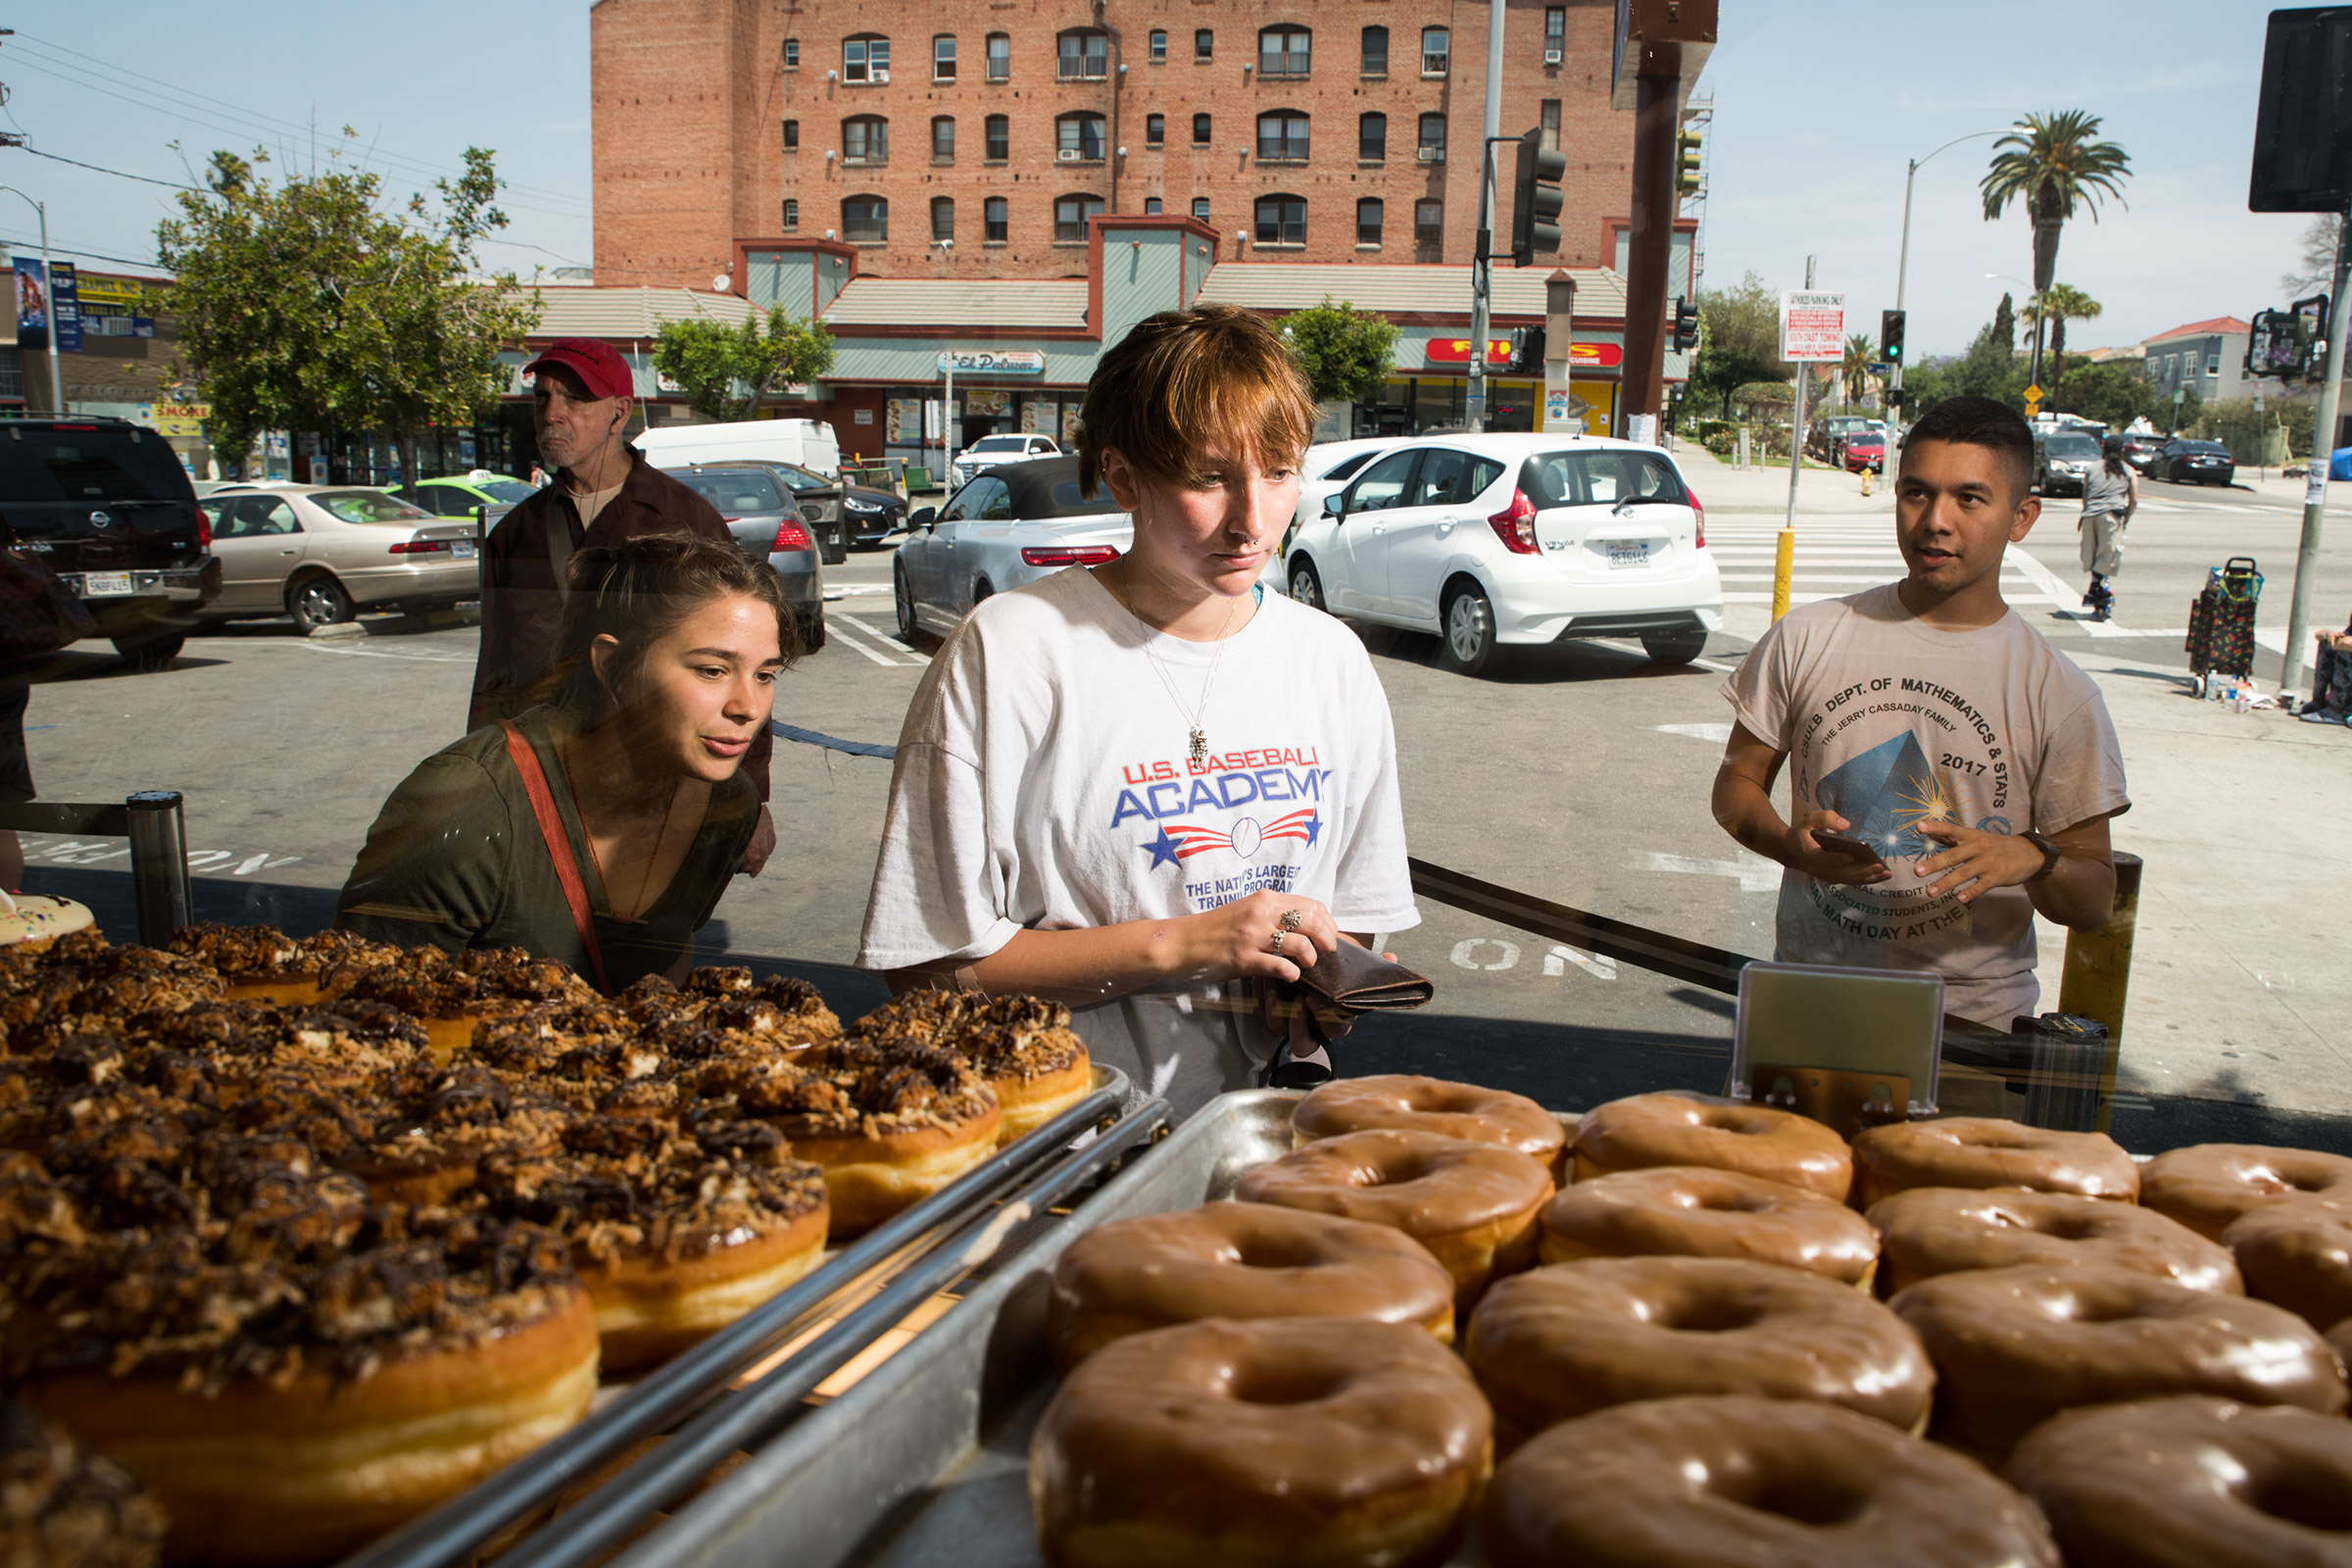 Katy McAfee, left, Abigail Logan, center, and Matthew Ortega pick out doughnuts at California Donuts in Los Angeles on June 6, 2019. (Theo Stroomer for TIME)